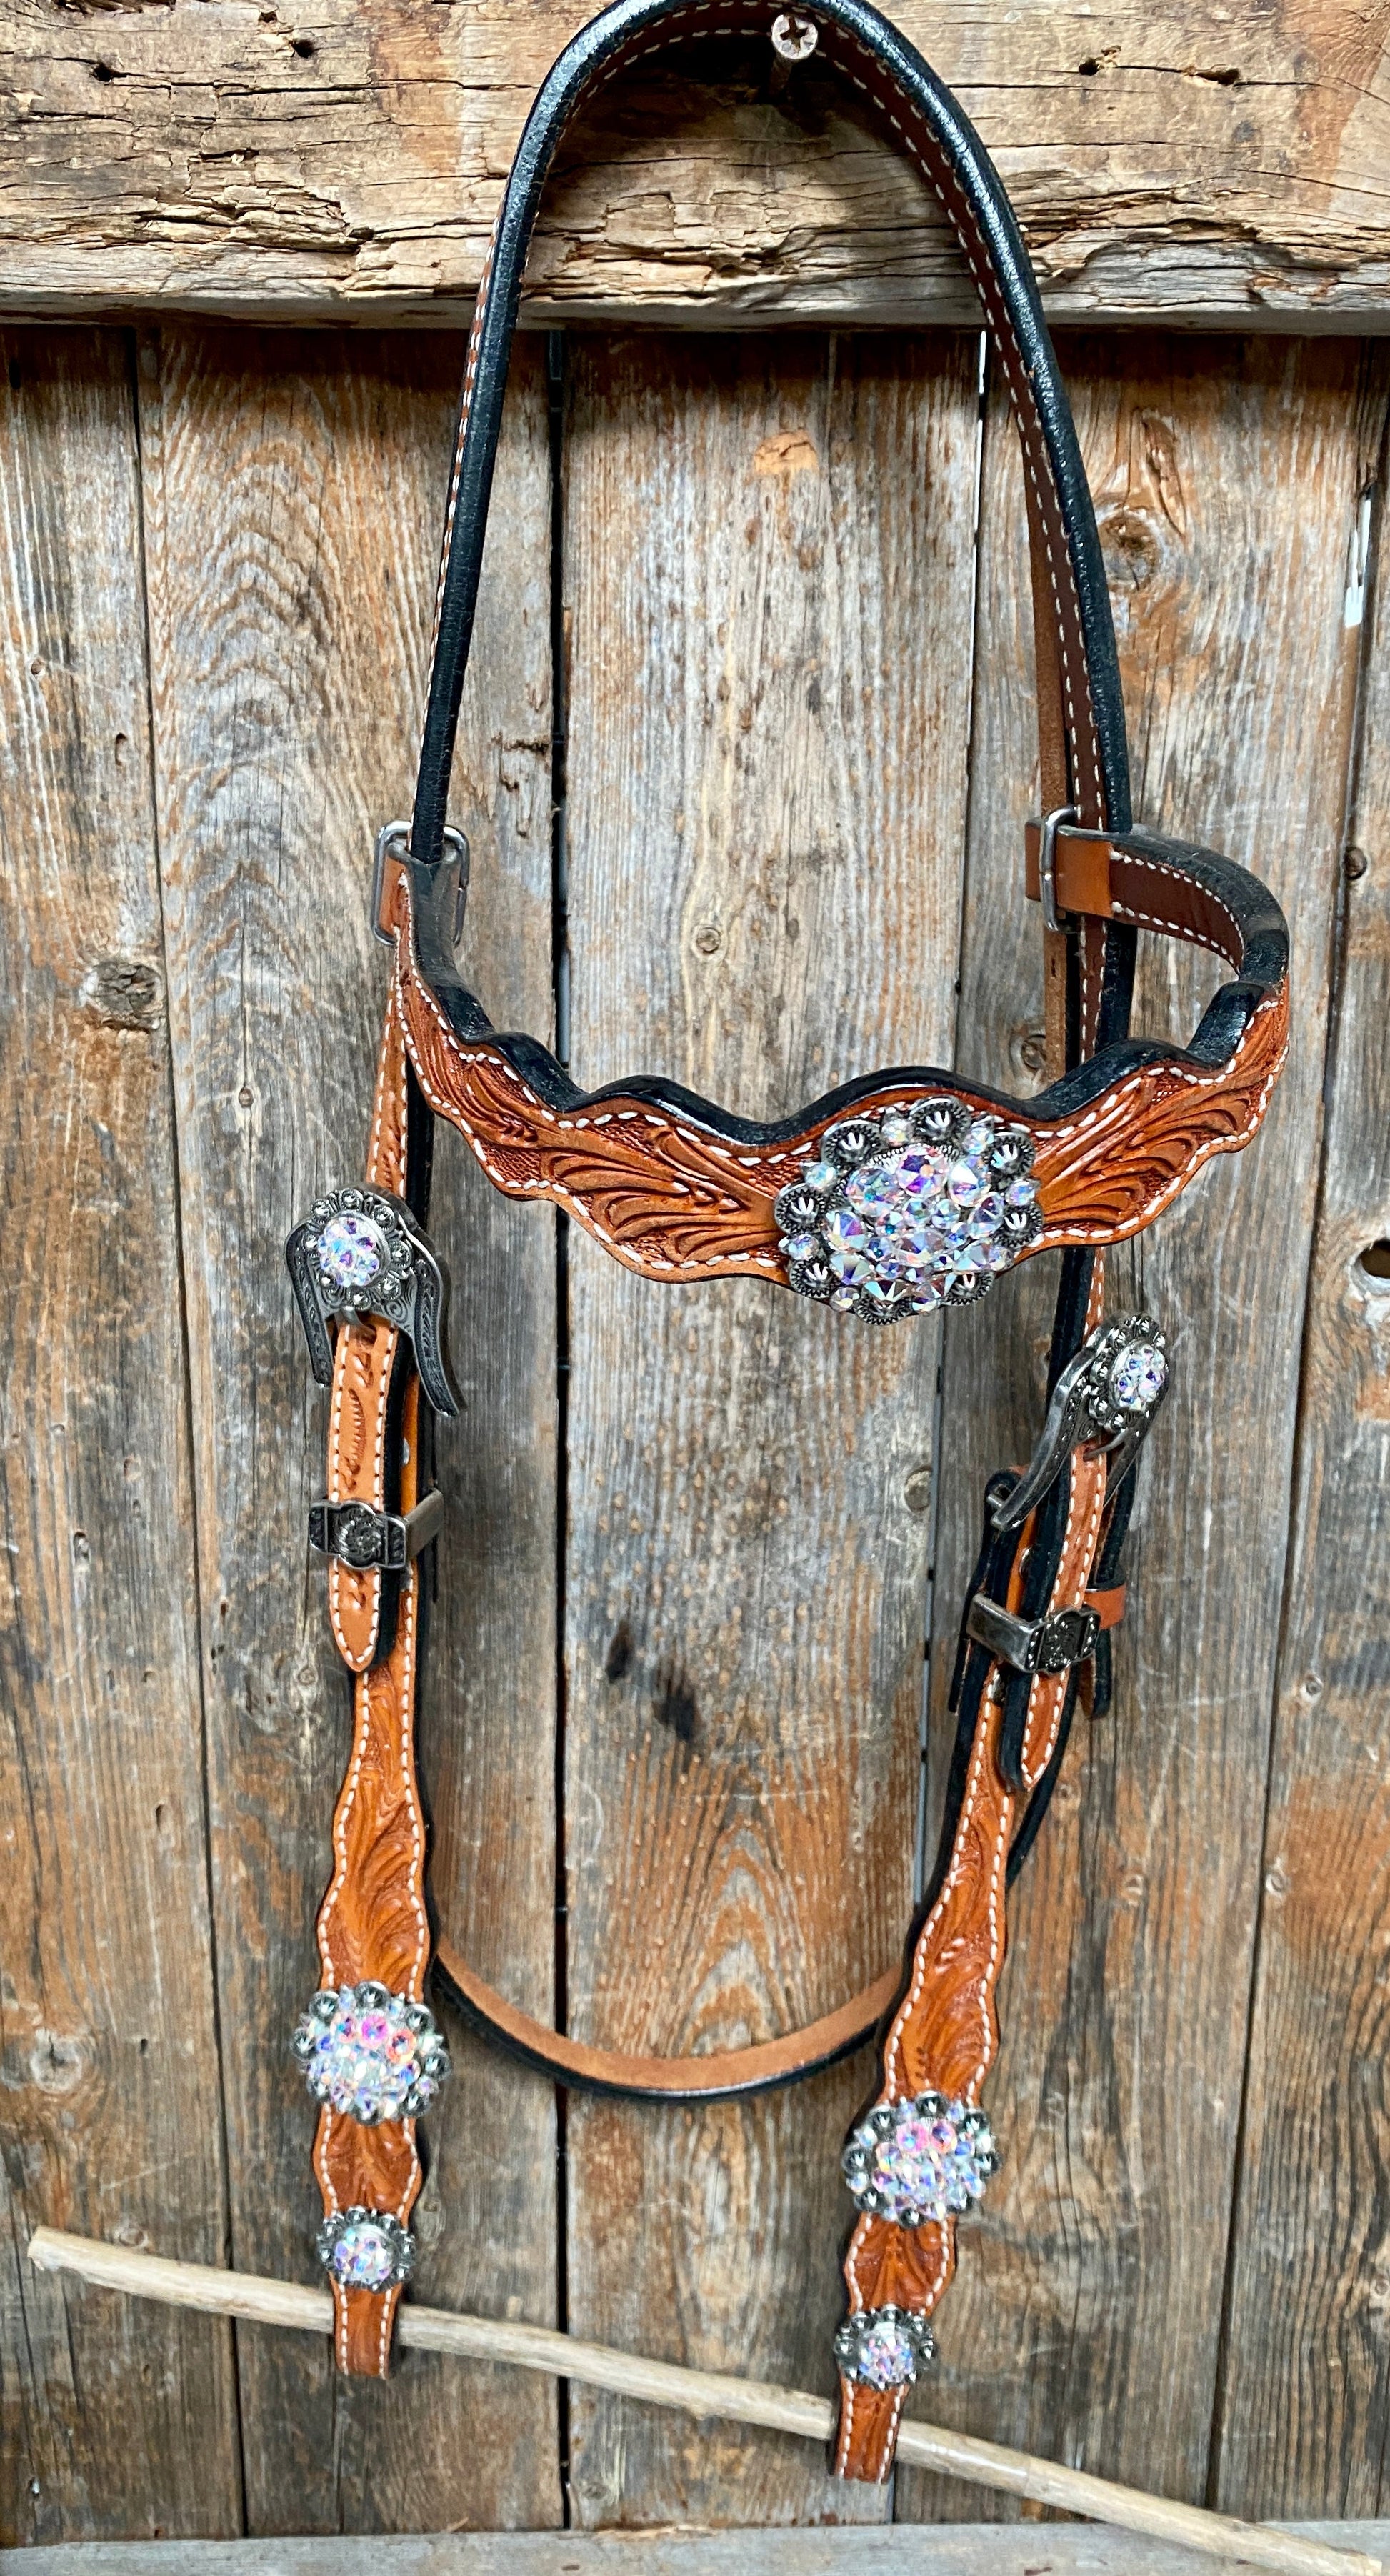 Light Oil and Antique Silver Browband & Breastcollar Tack Set #BBBC431 - RODEO DRIVE